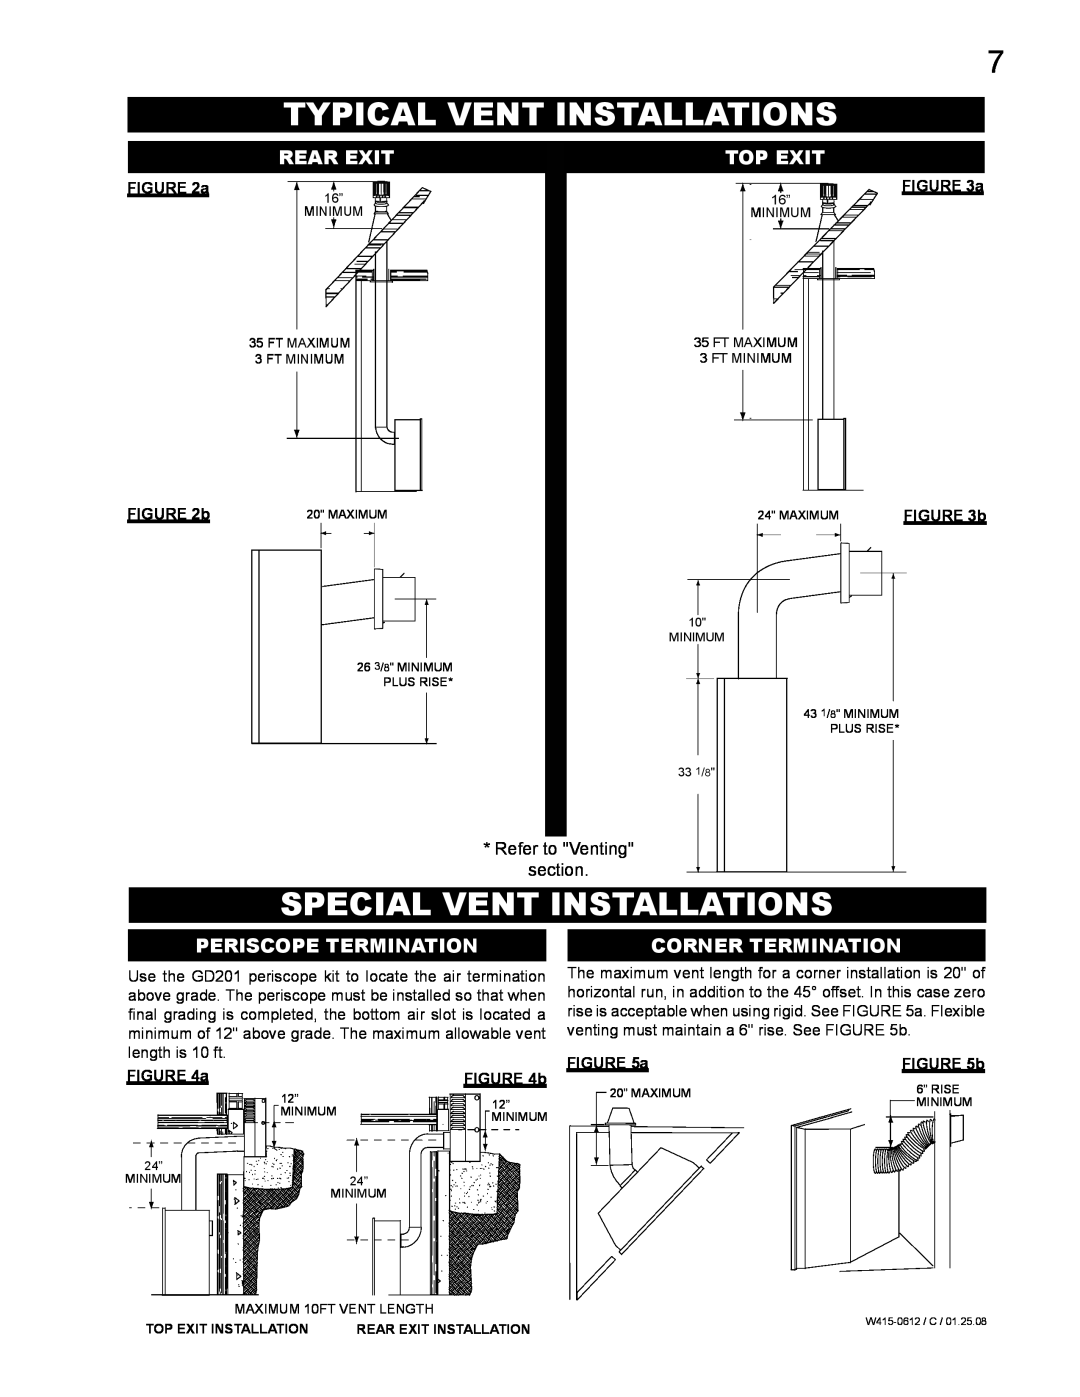 Napoleon Fireplaces GD19N Typical Vent Installations, Special Vent Installations, Rear Exit, Top Exit, Corner Termination 